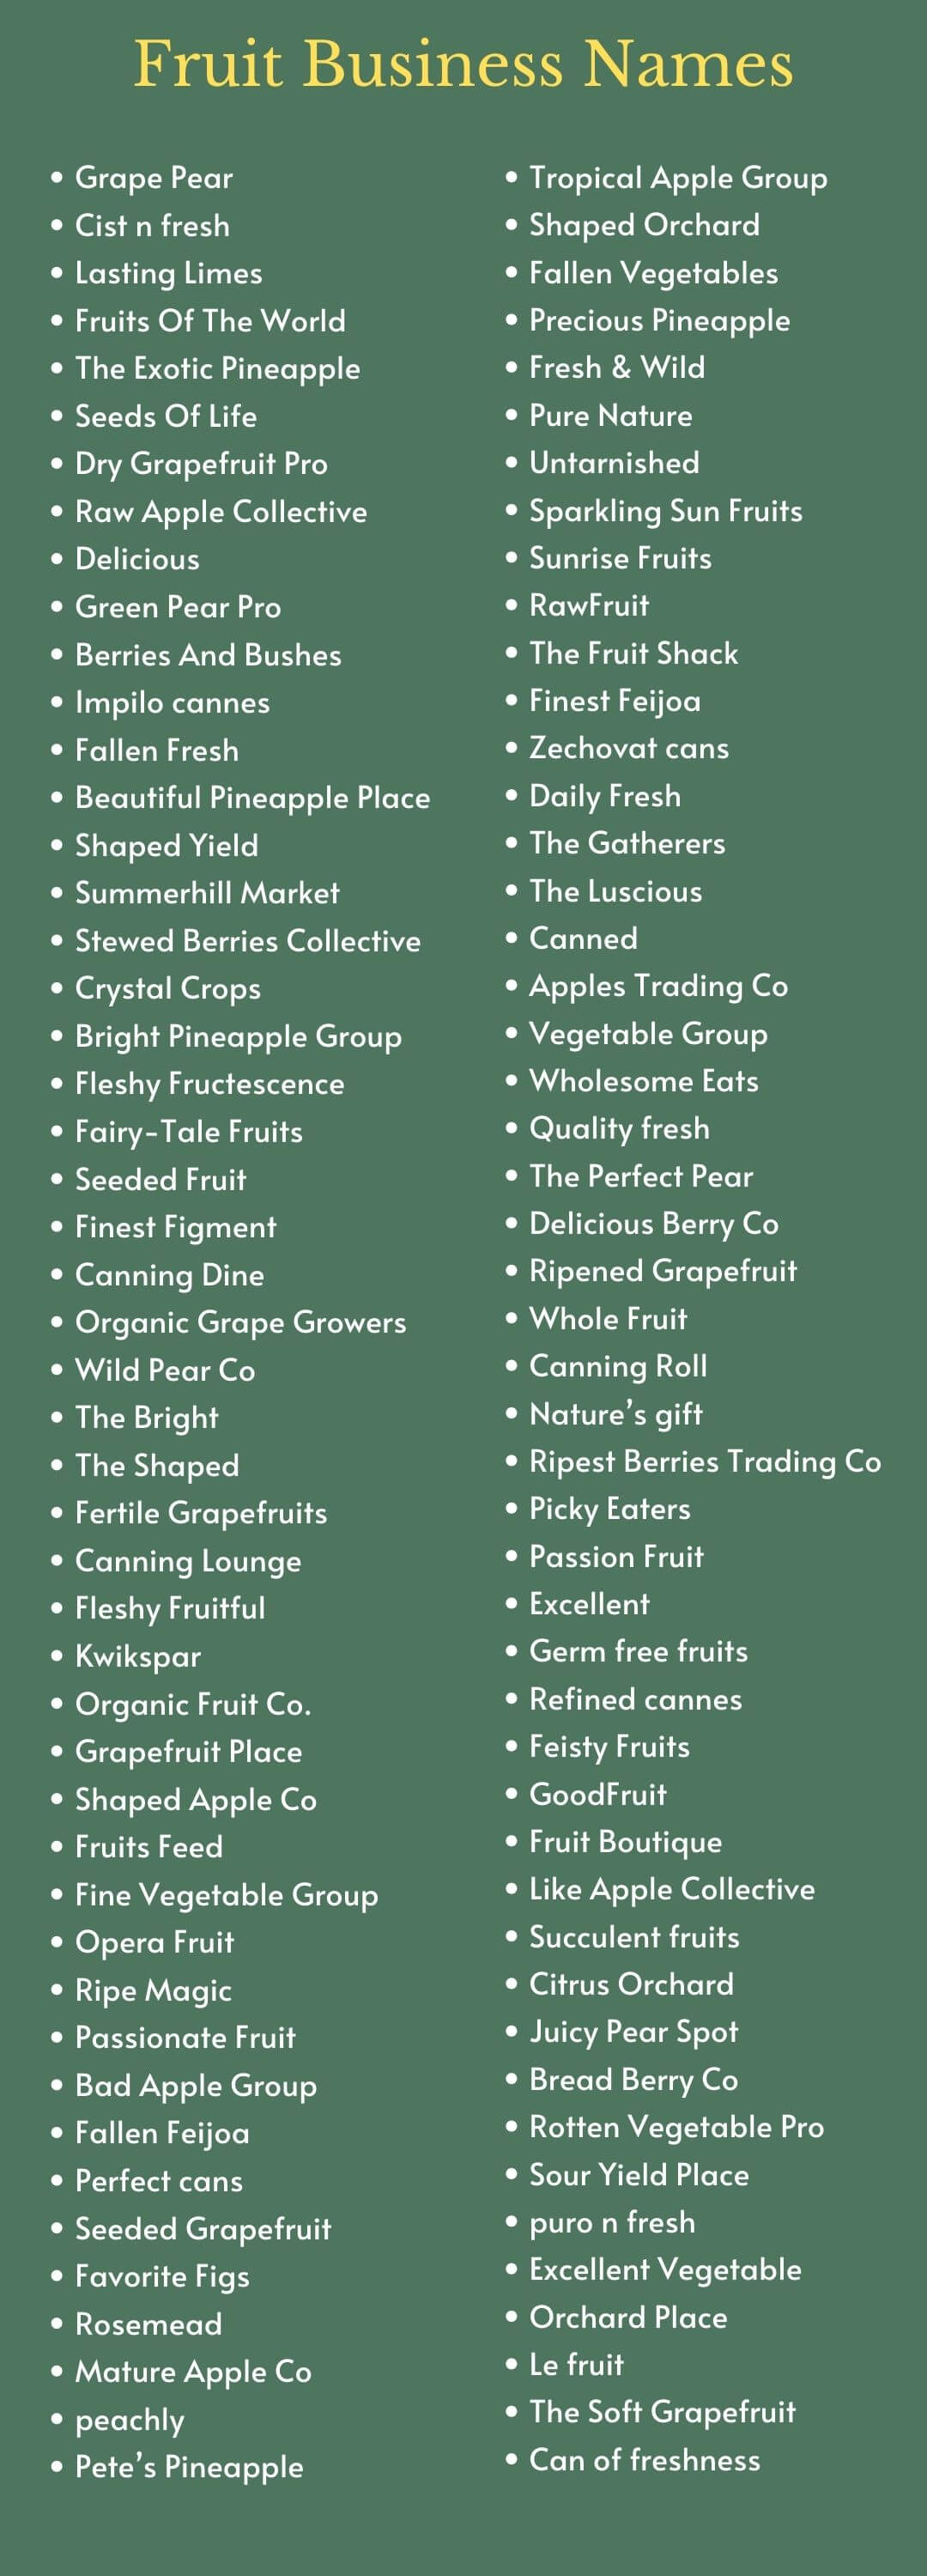 Fruit Business Names: infographic